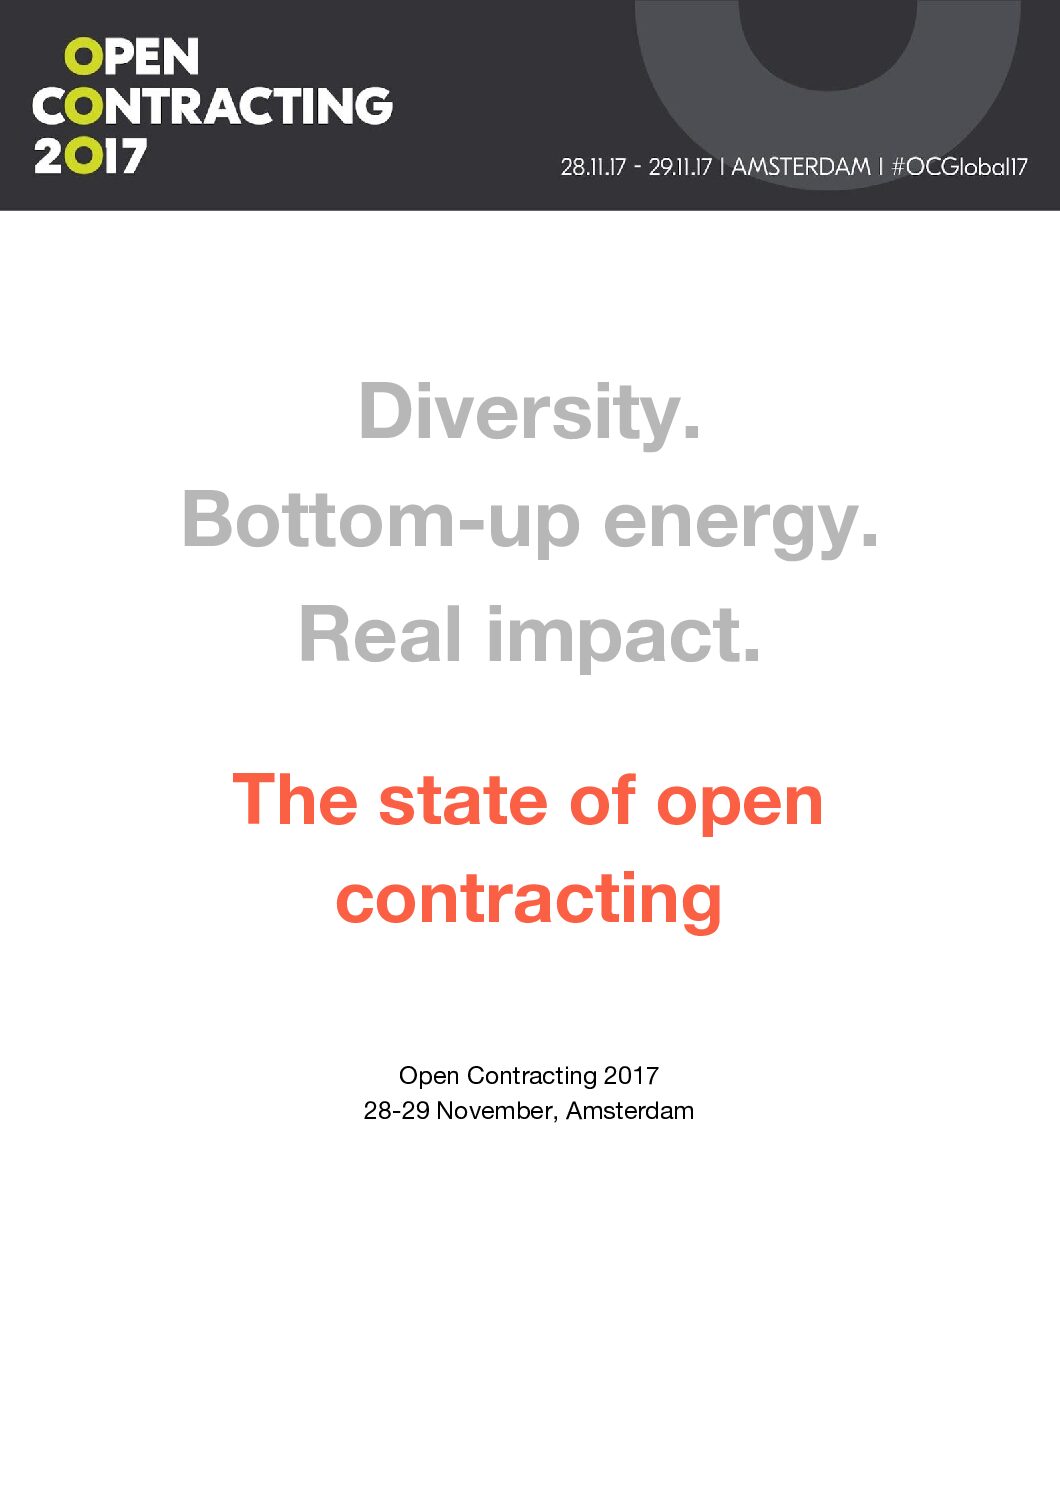 Diversity.  Bottom-up energy.  Real impact.   The state of open contracting.